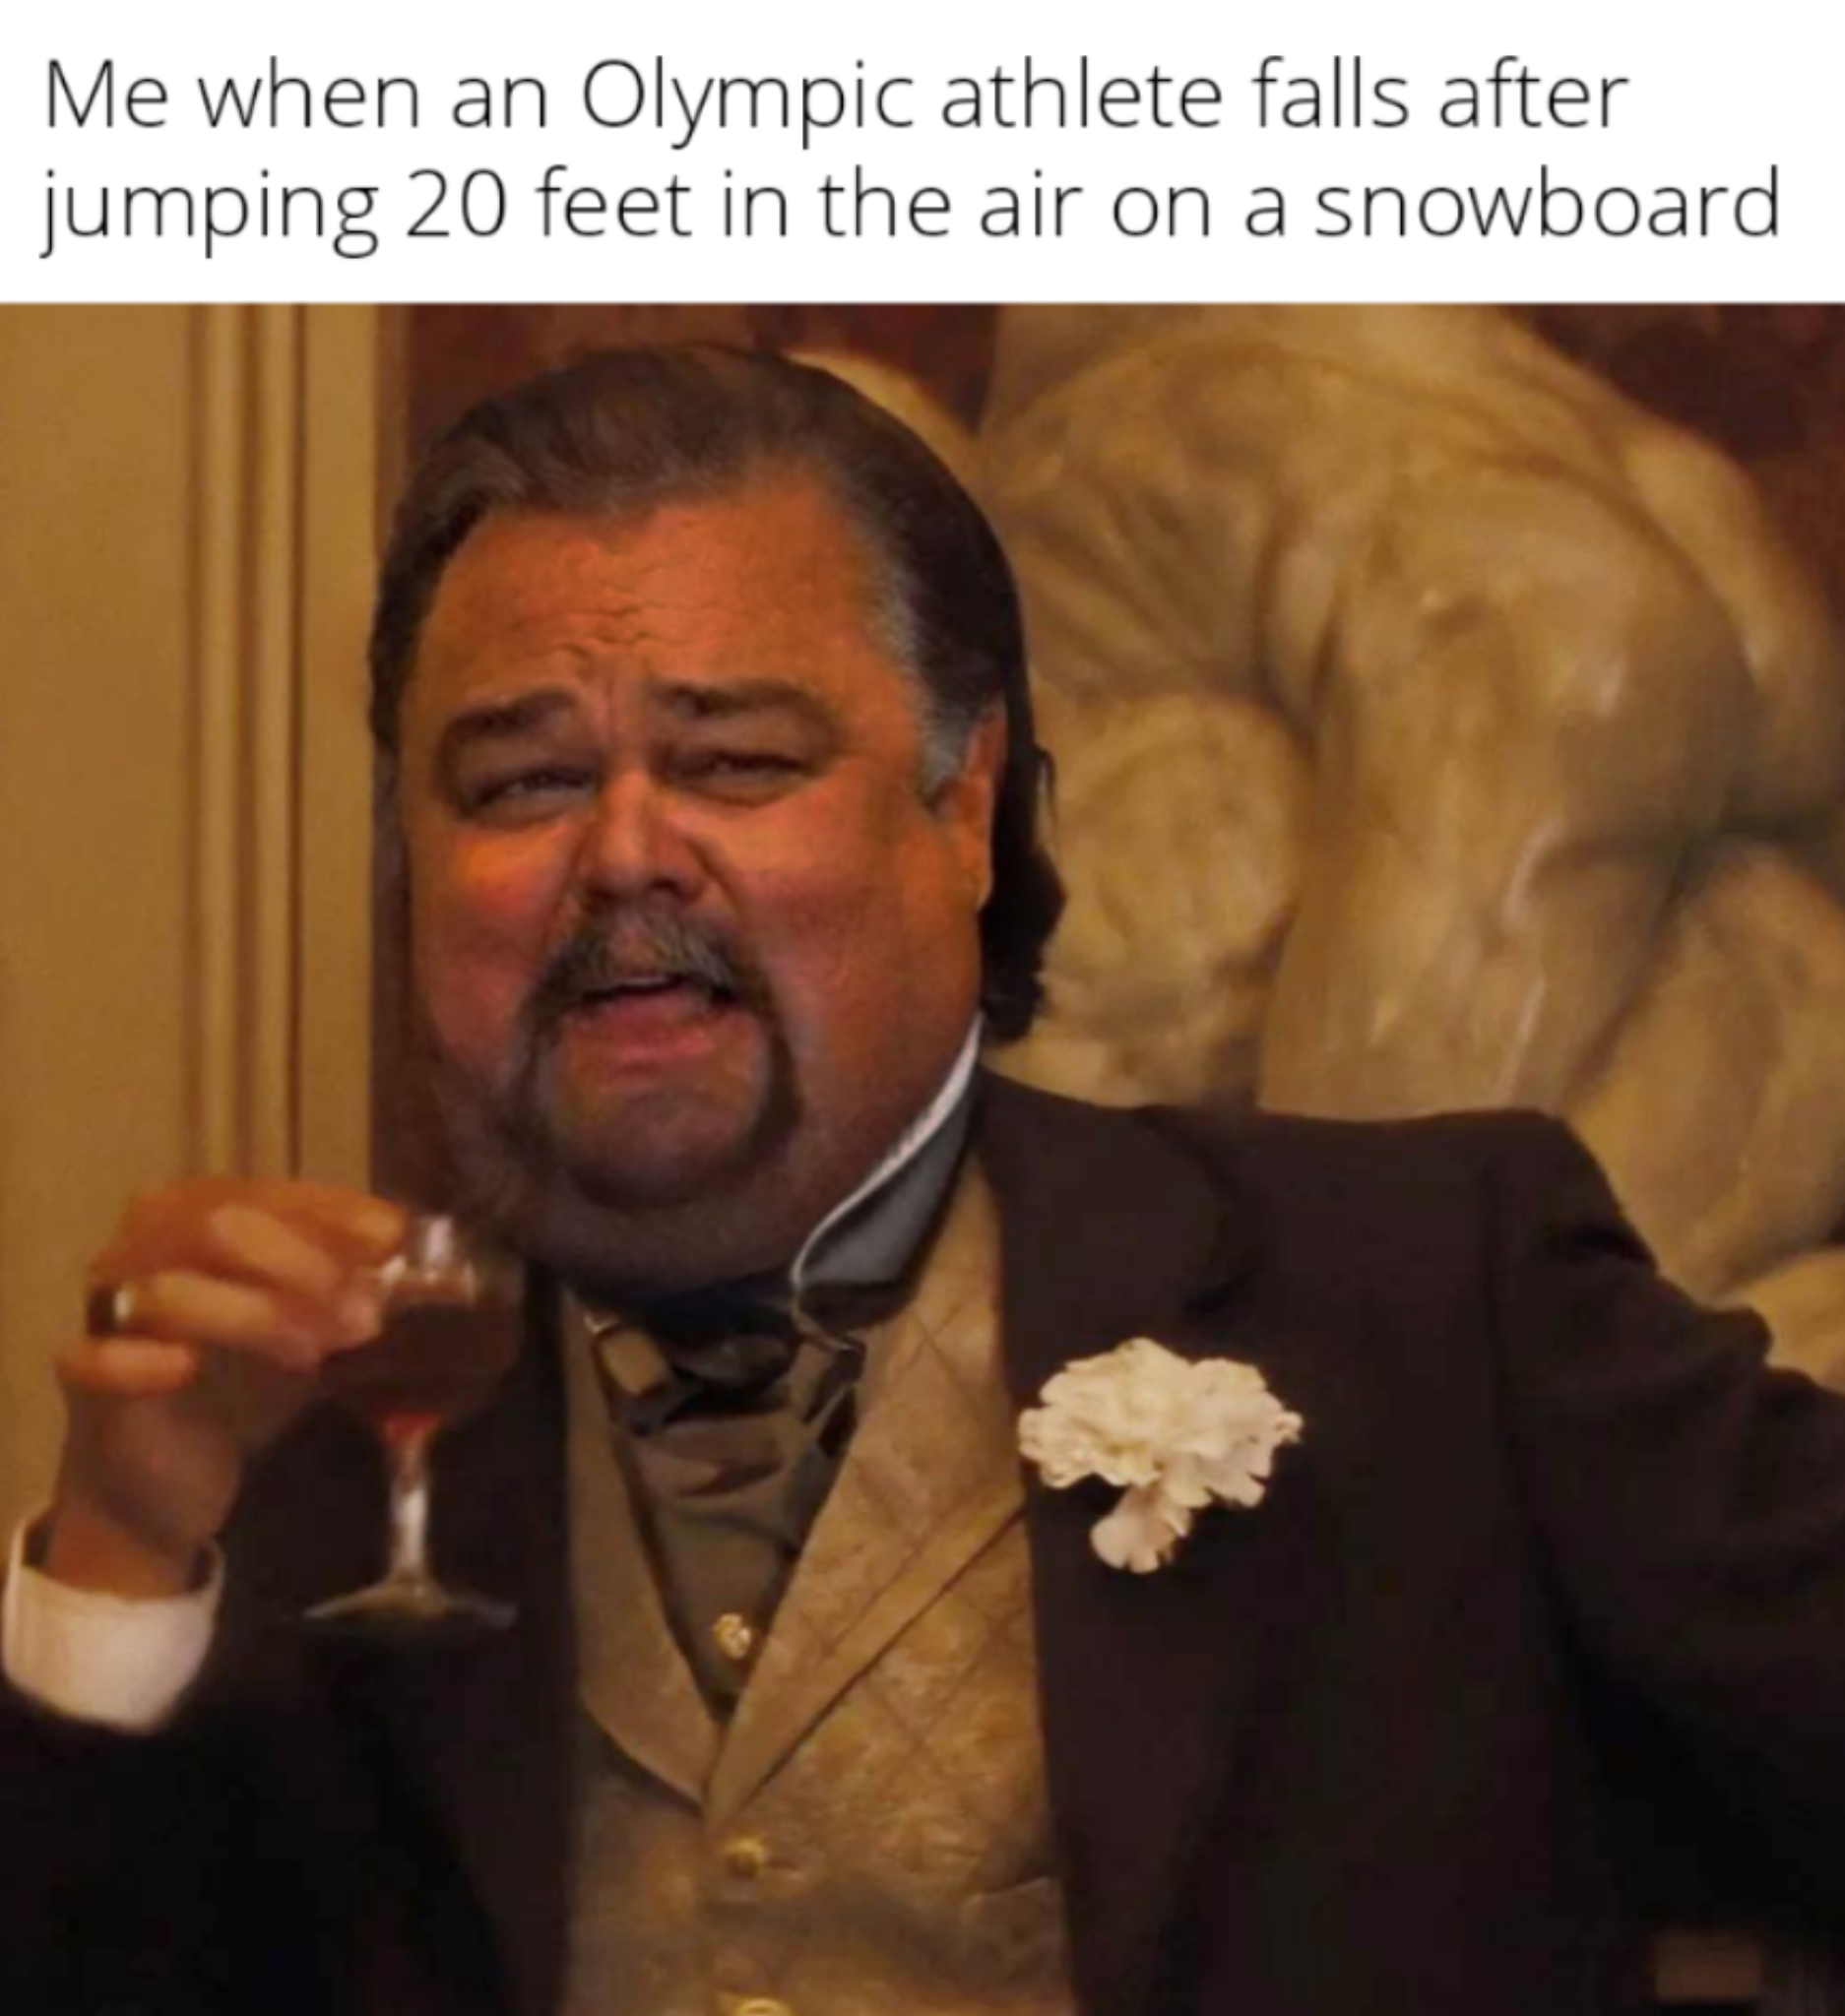 dank memes - funny memes - fat leonardo dicaprio meme template - Me when an Olympic athlete falls after jumping 20 feet in the air on a snowboard